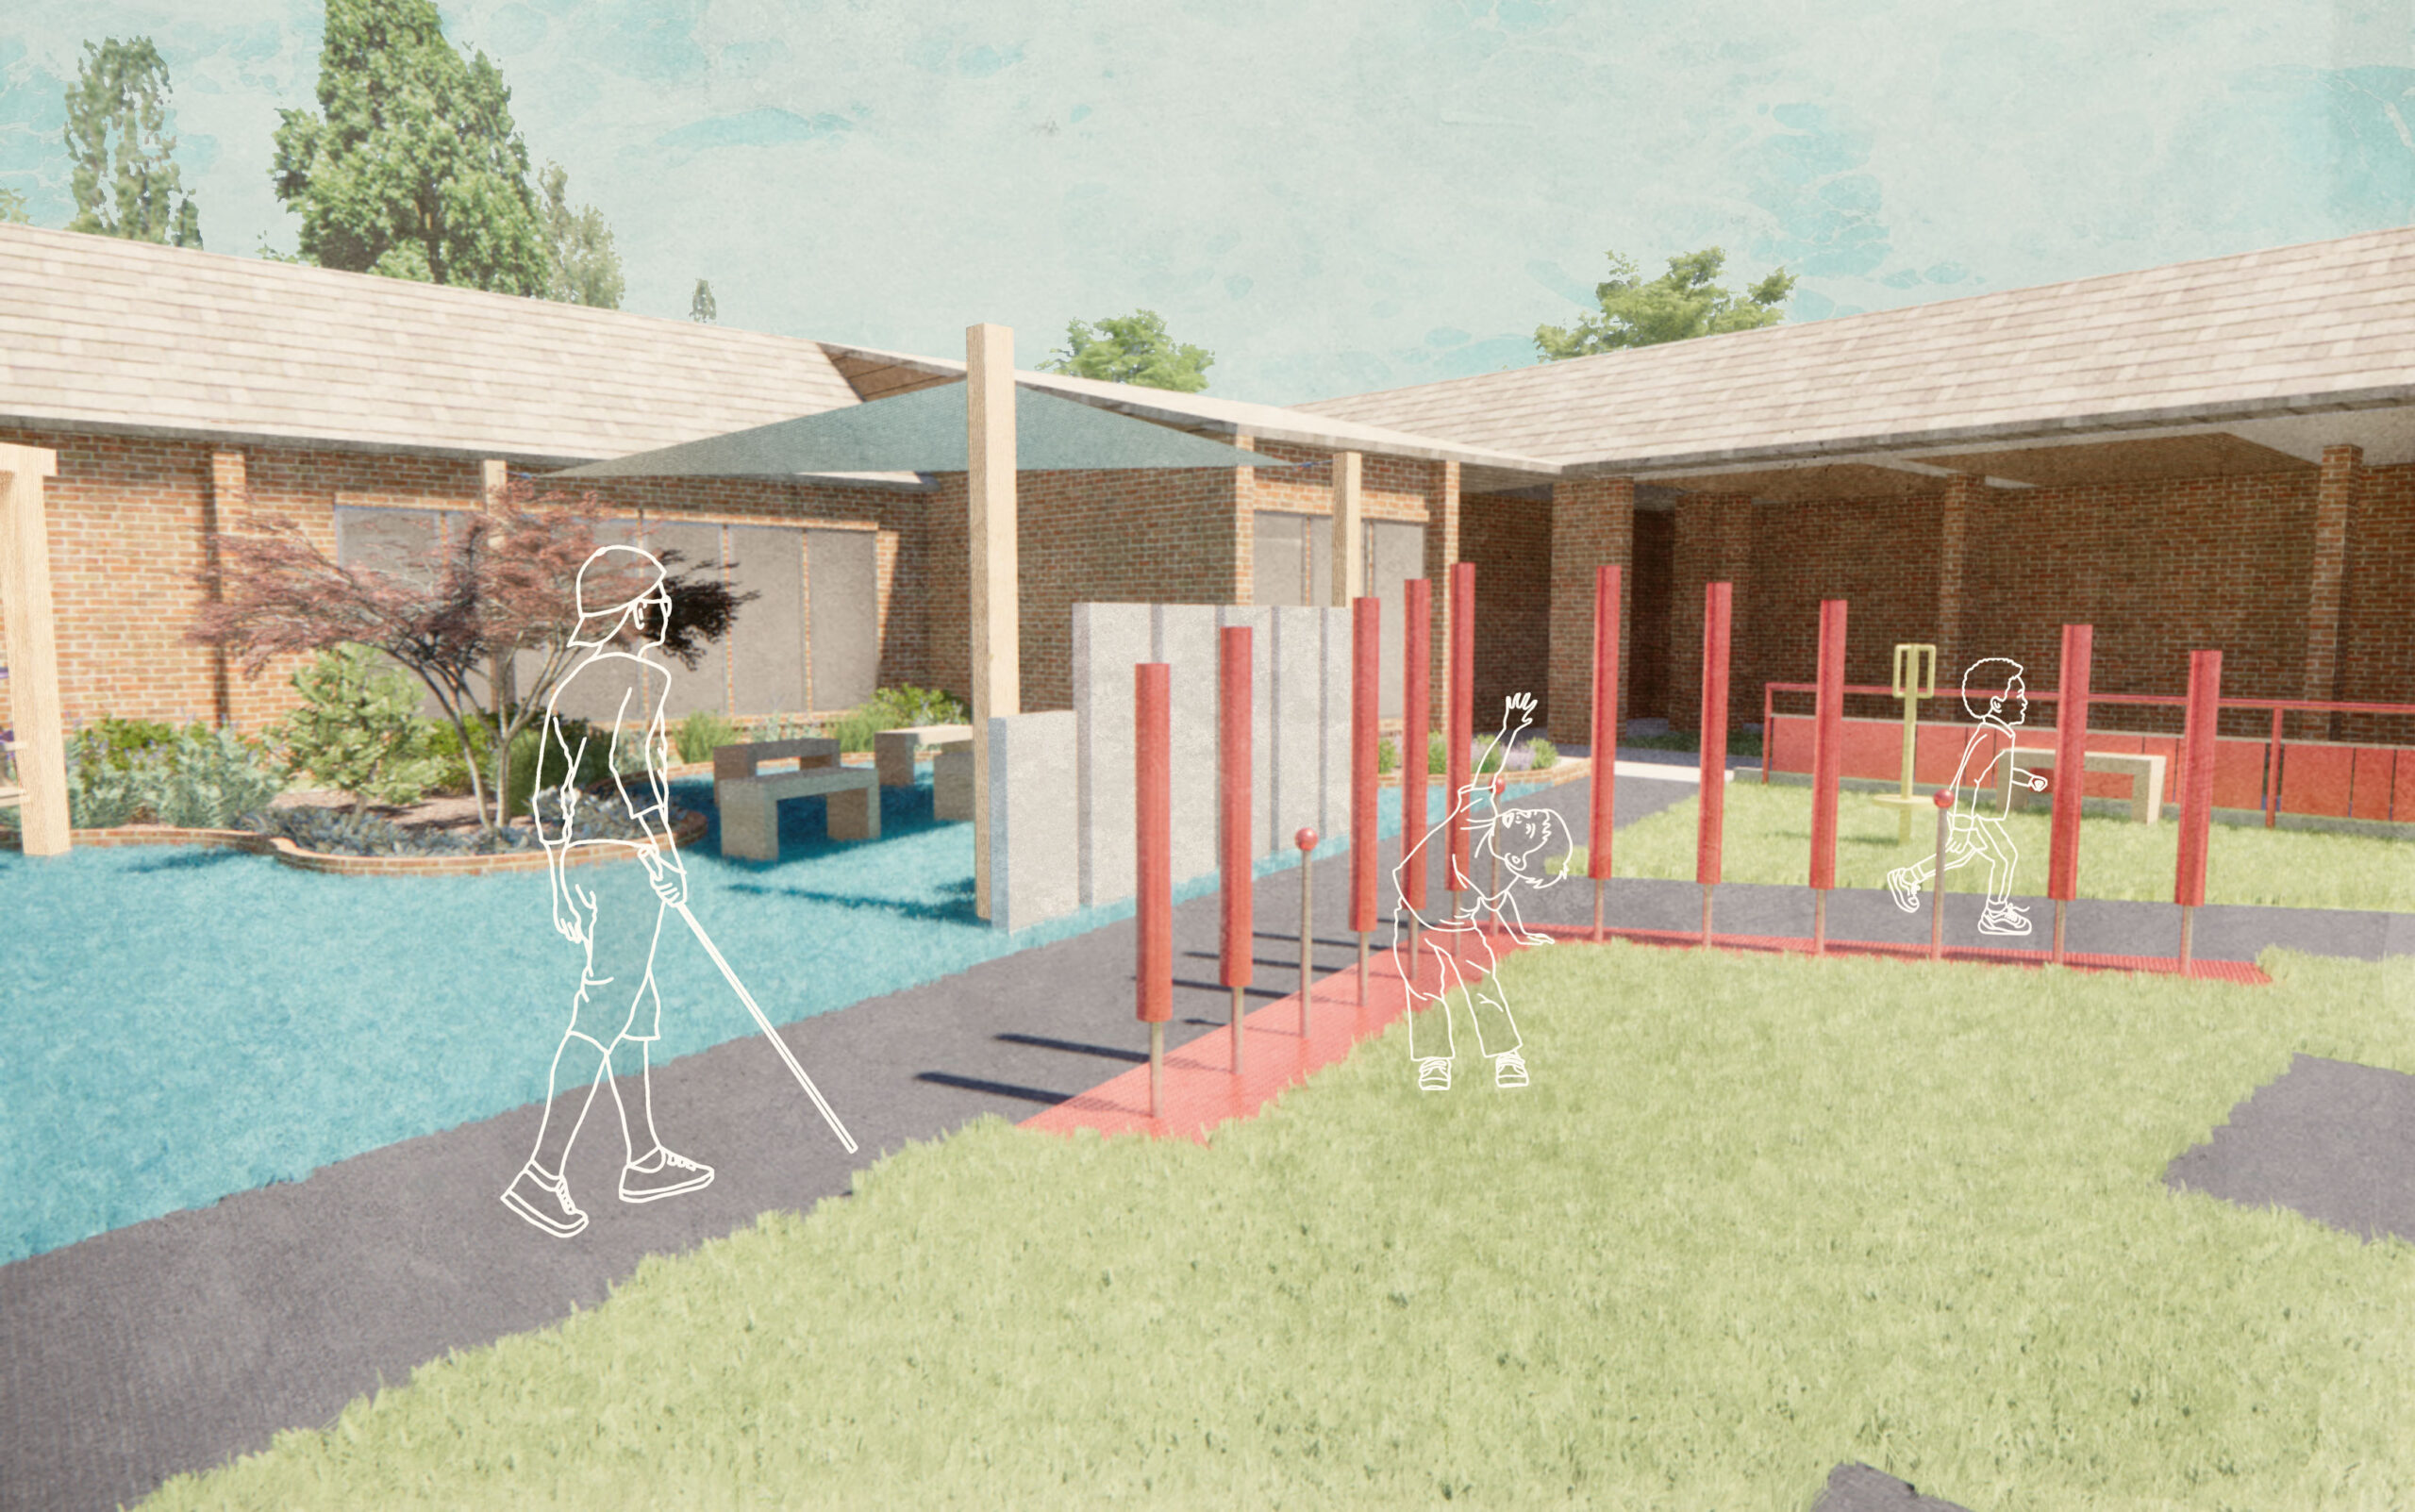 Freedom by Design rendering of the Governor Morehead School outdoor play area